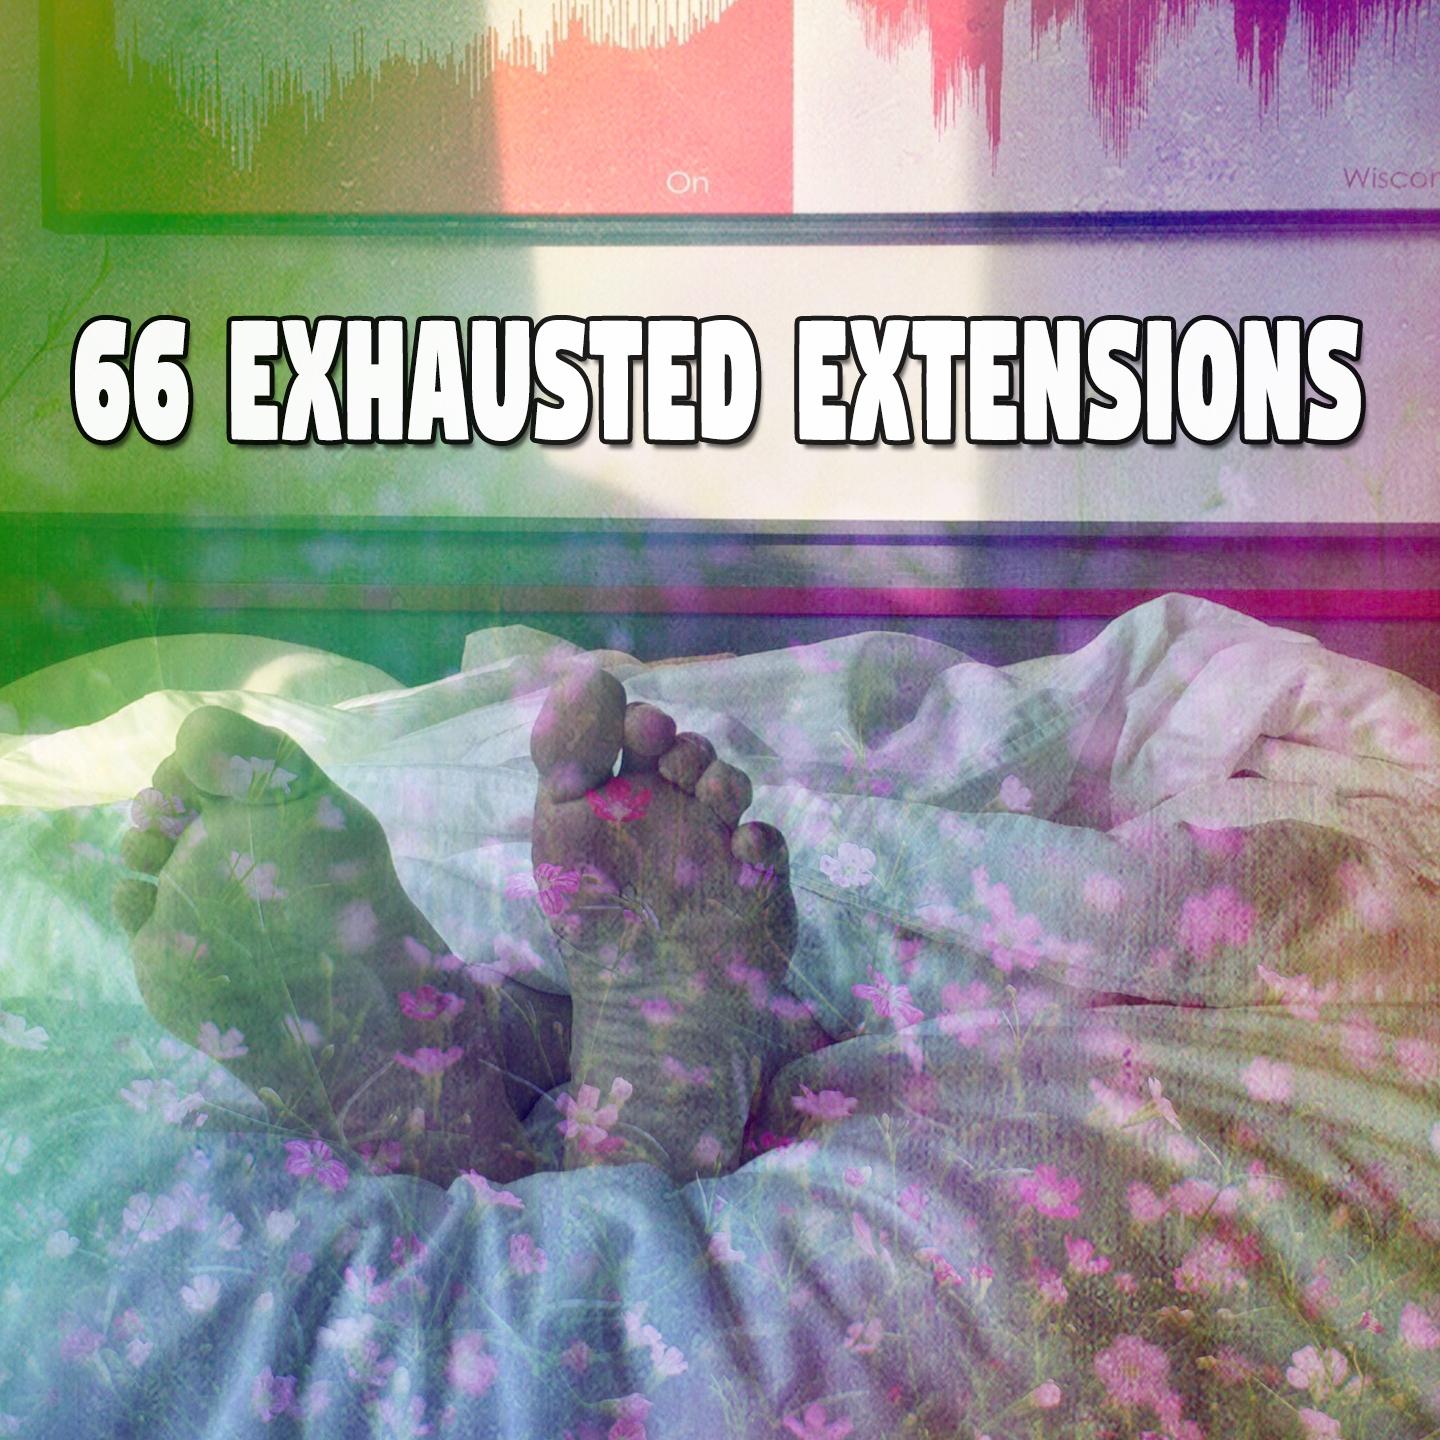 66 Exhausted Extensions